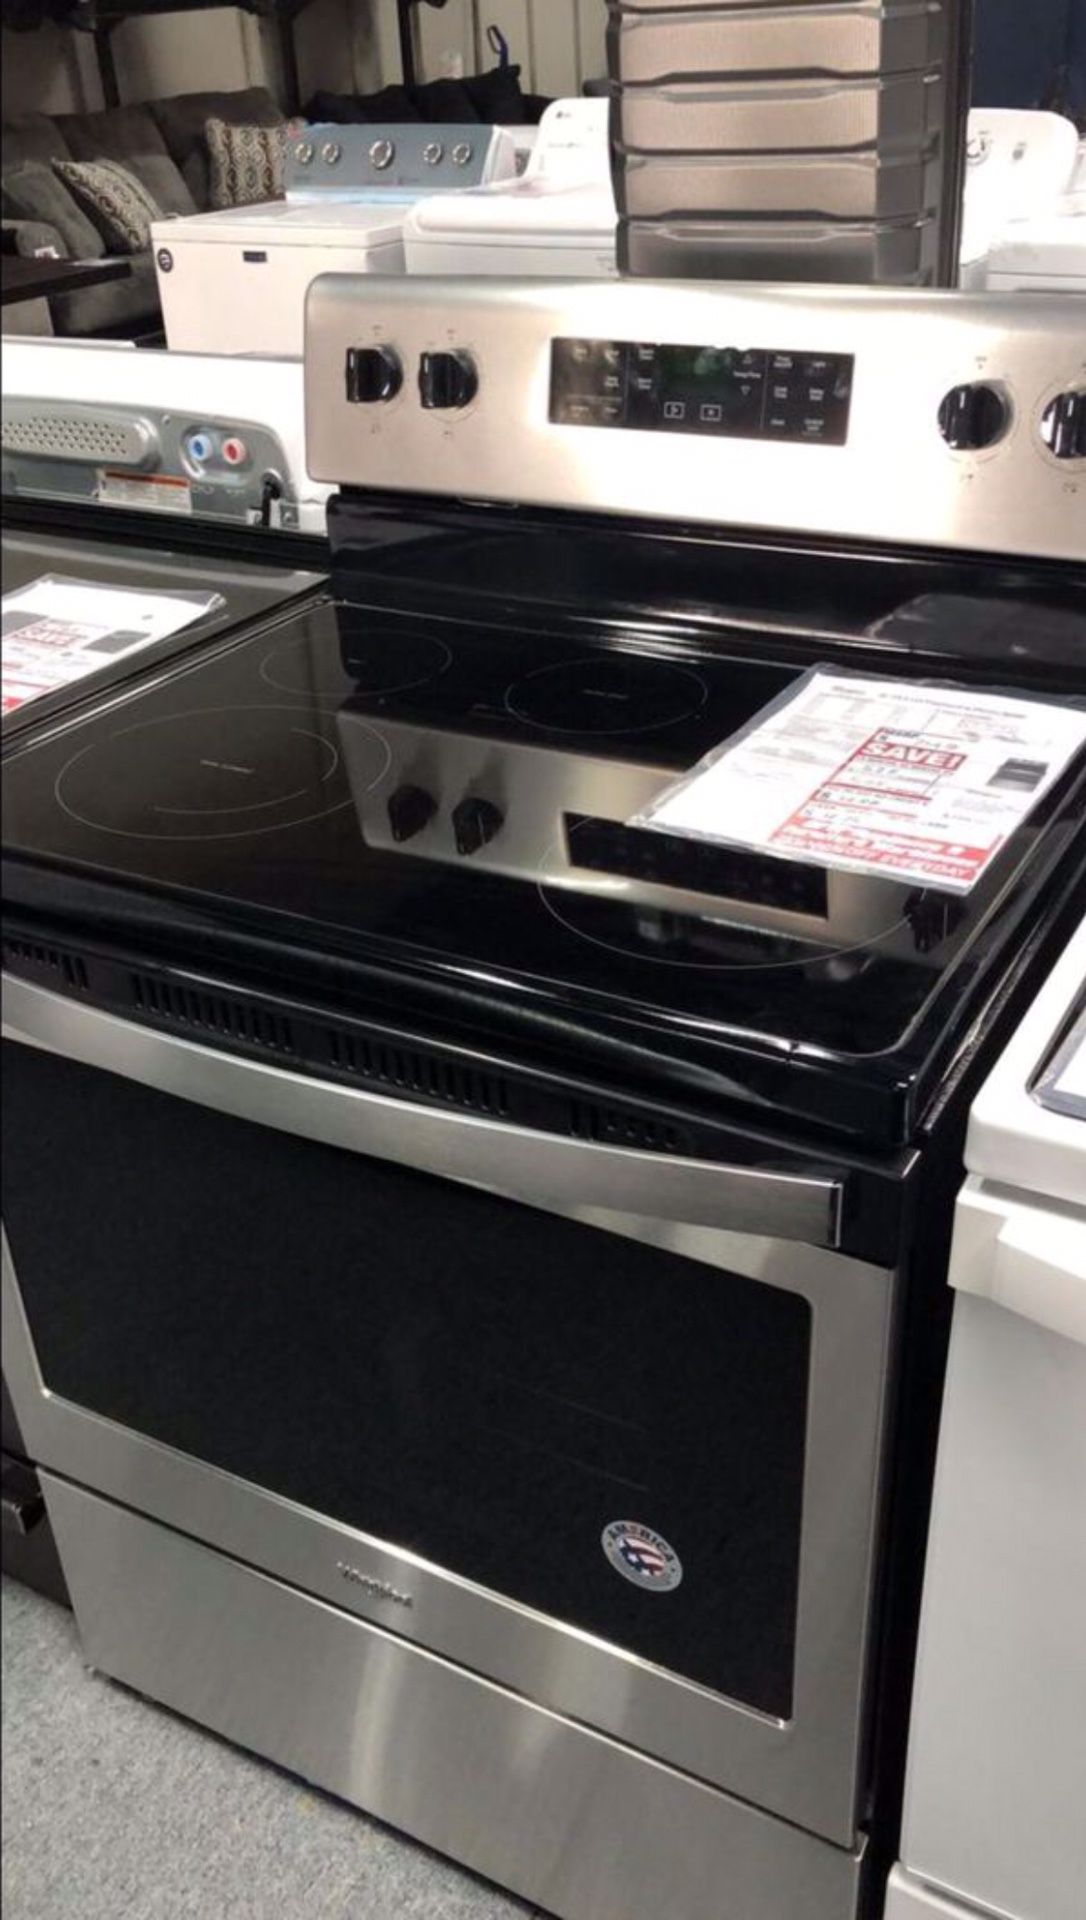 Freestanding electric range 30 inches regular price $749 our price $449